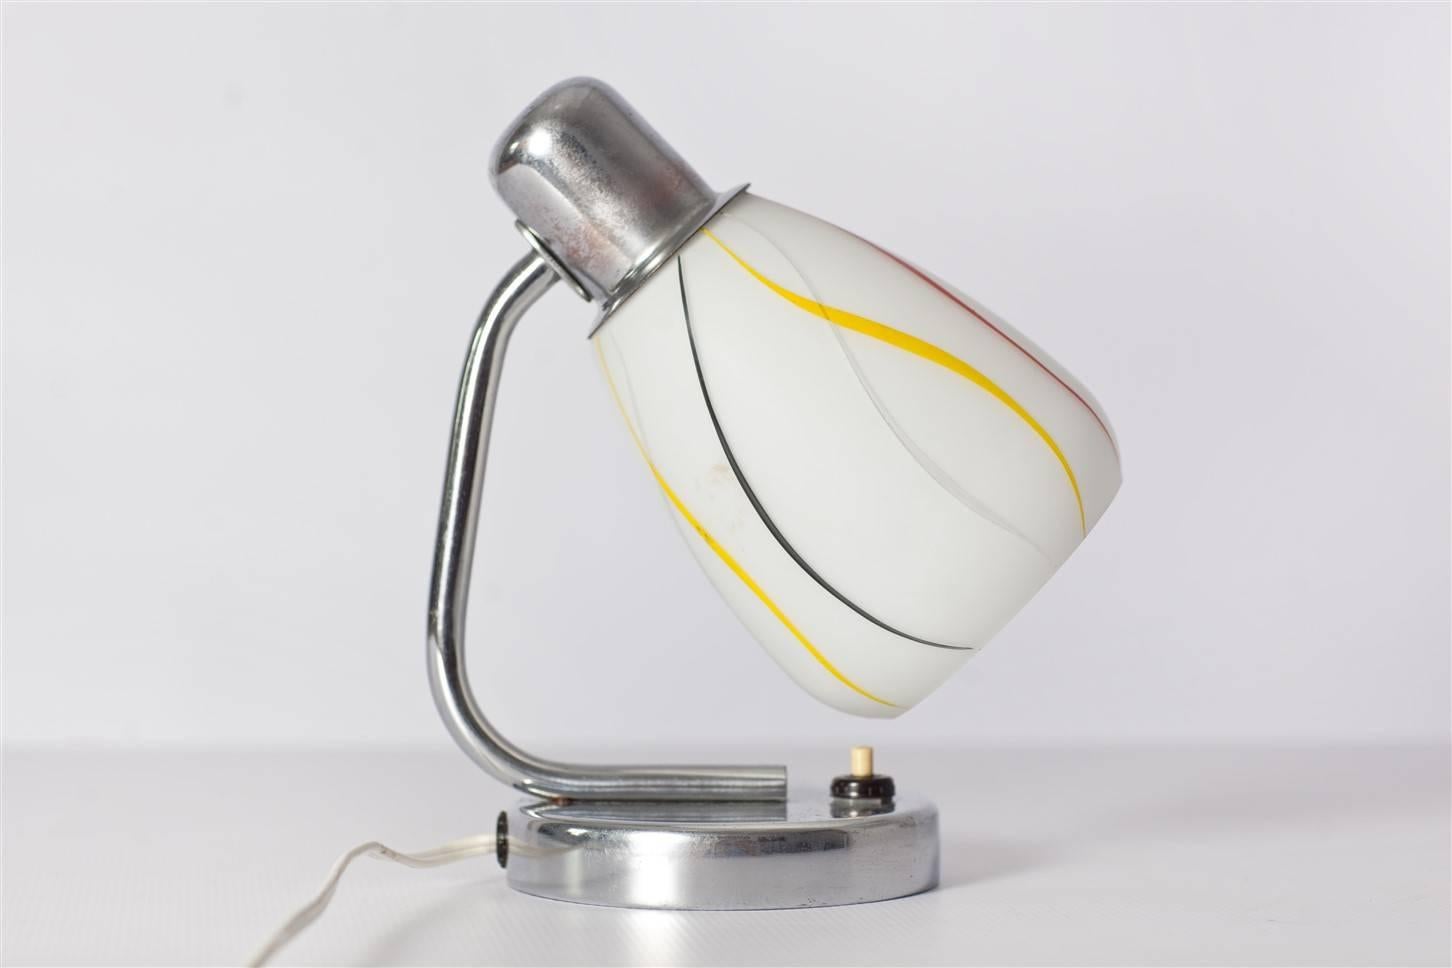 Czech Chrome Table Lamp with Colorful Striped Lampshade from Napako, 1940s